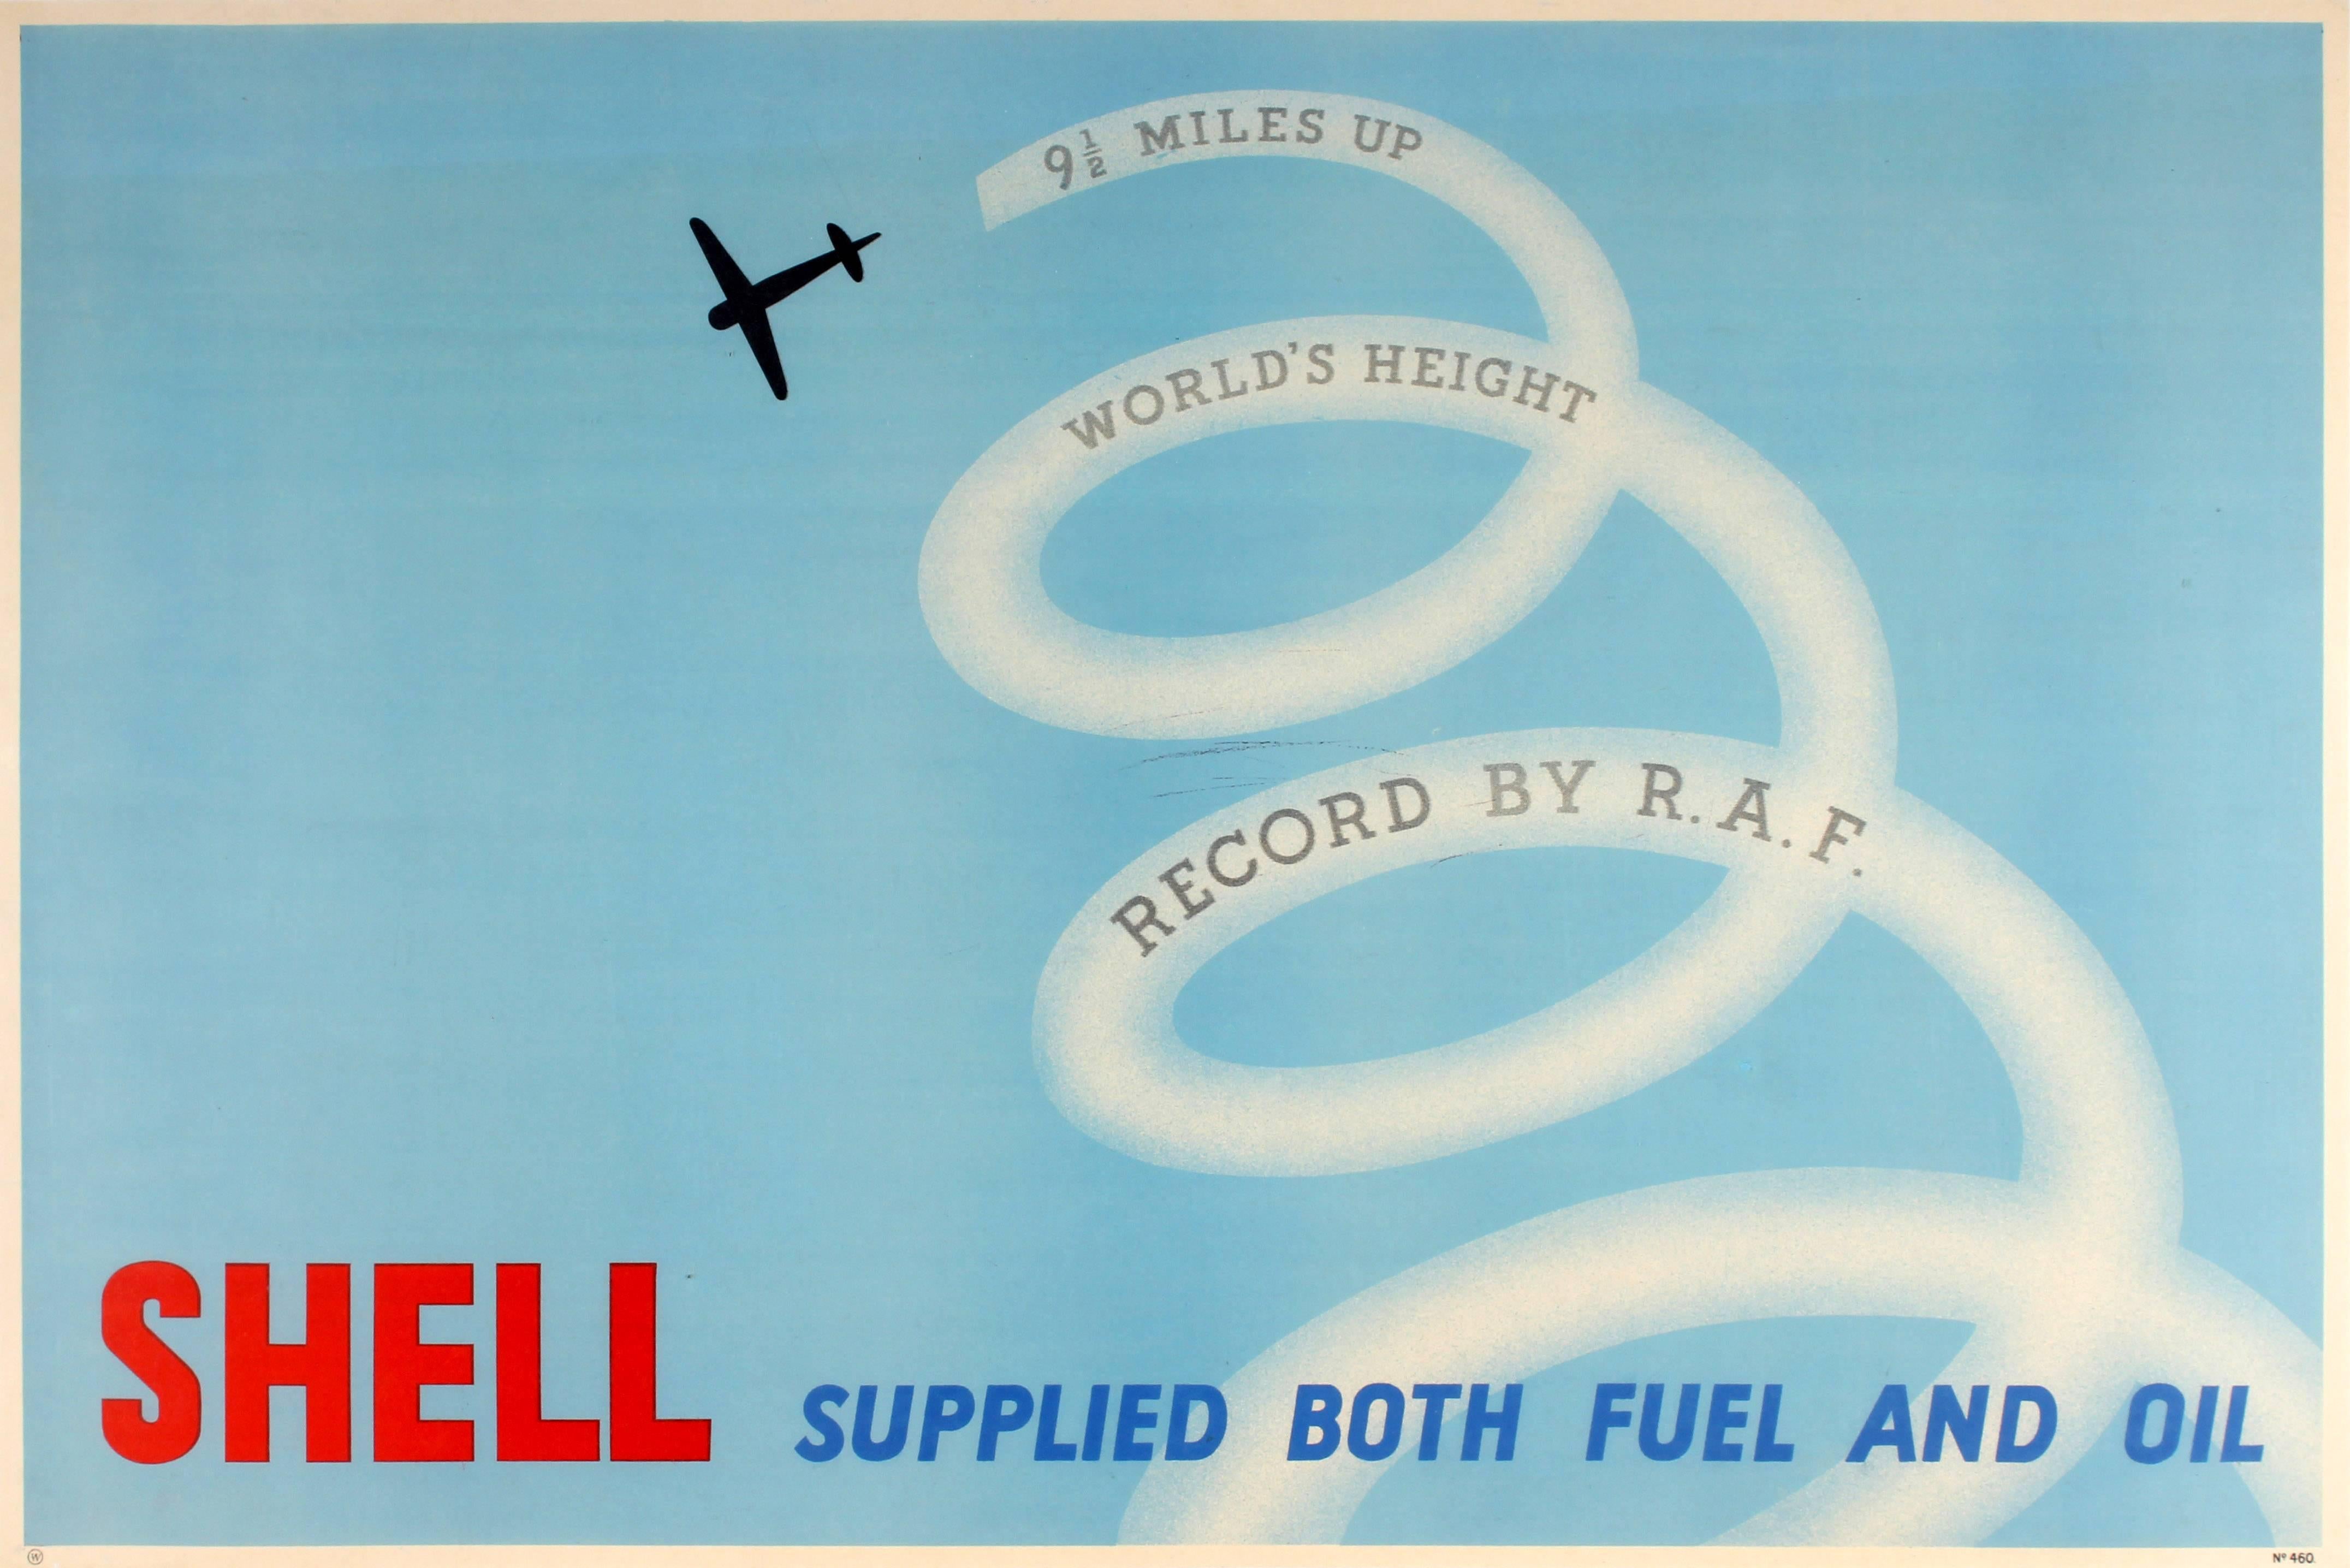 Unknown Print - Original 1930s Poster: 9½ Miles Up World Height Record By RAF - Shell Oil & Fuel